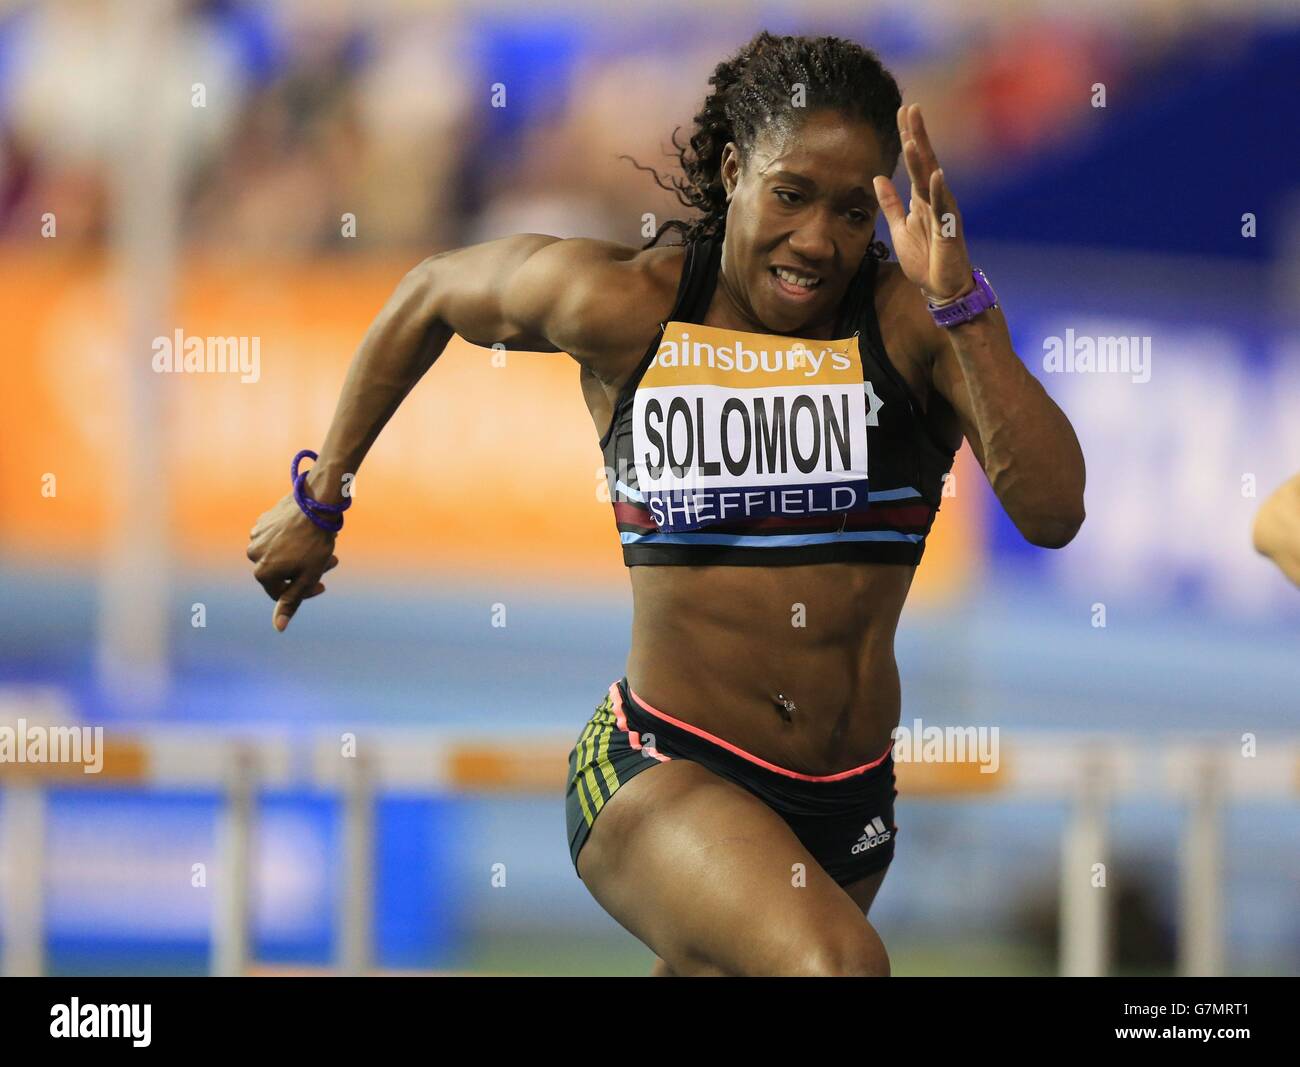 Serita Solomon wins the final of the women's 60 metre hurdles during day two of the Sainsbury's British Indoor Championships at the English Institute of Sport, Sheffield. Stock Photo